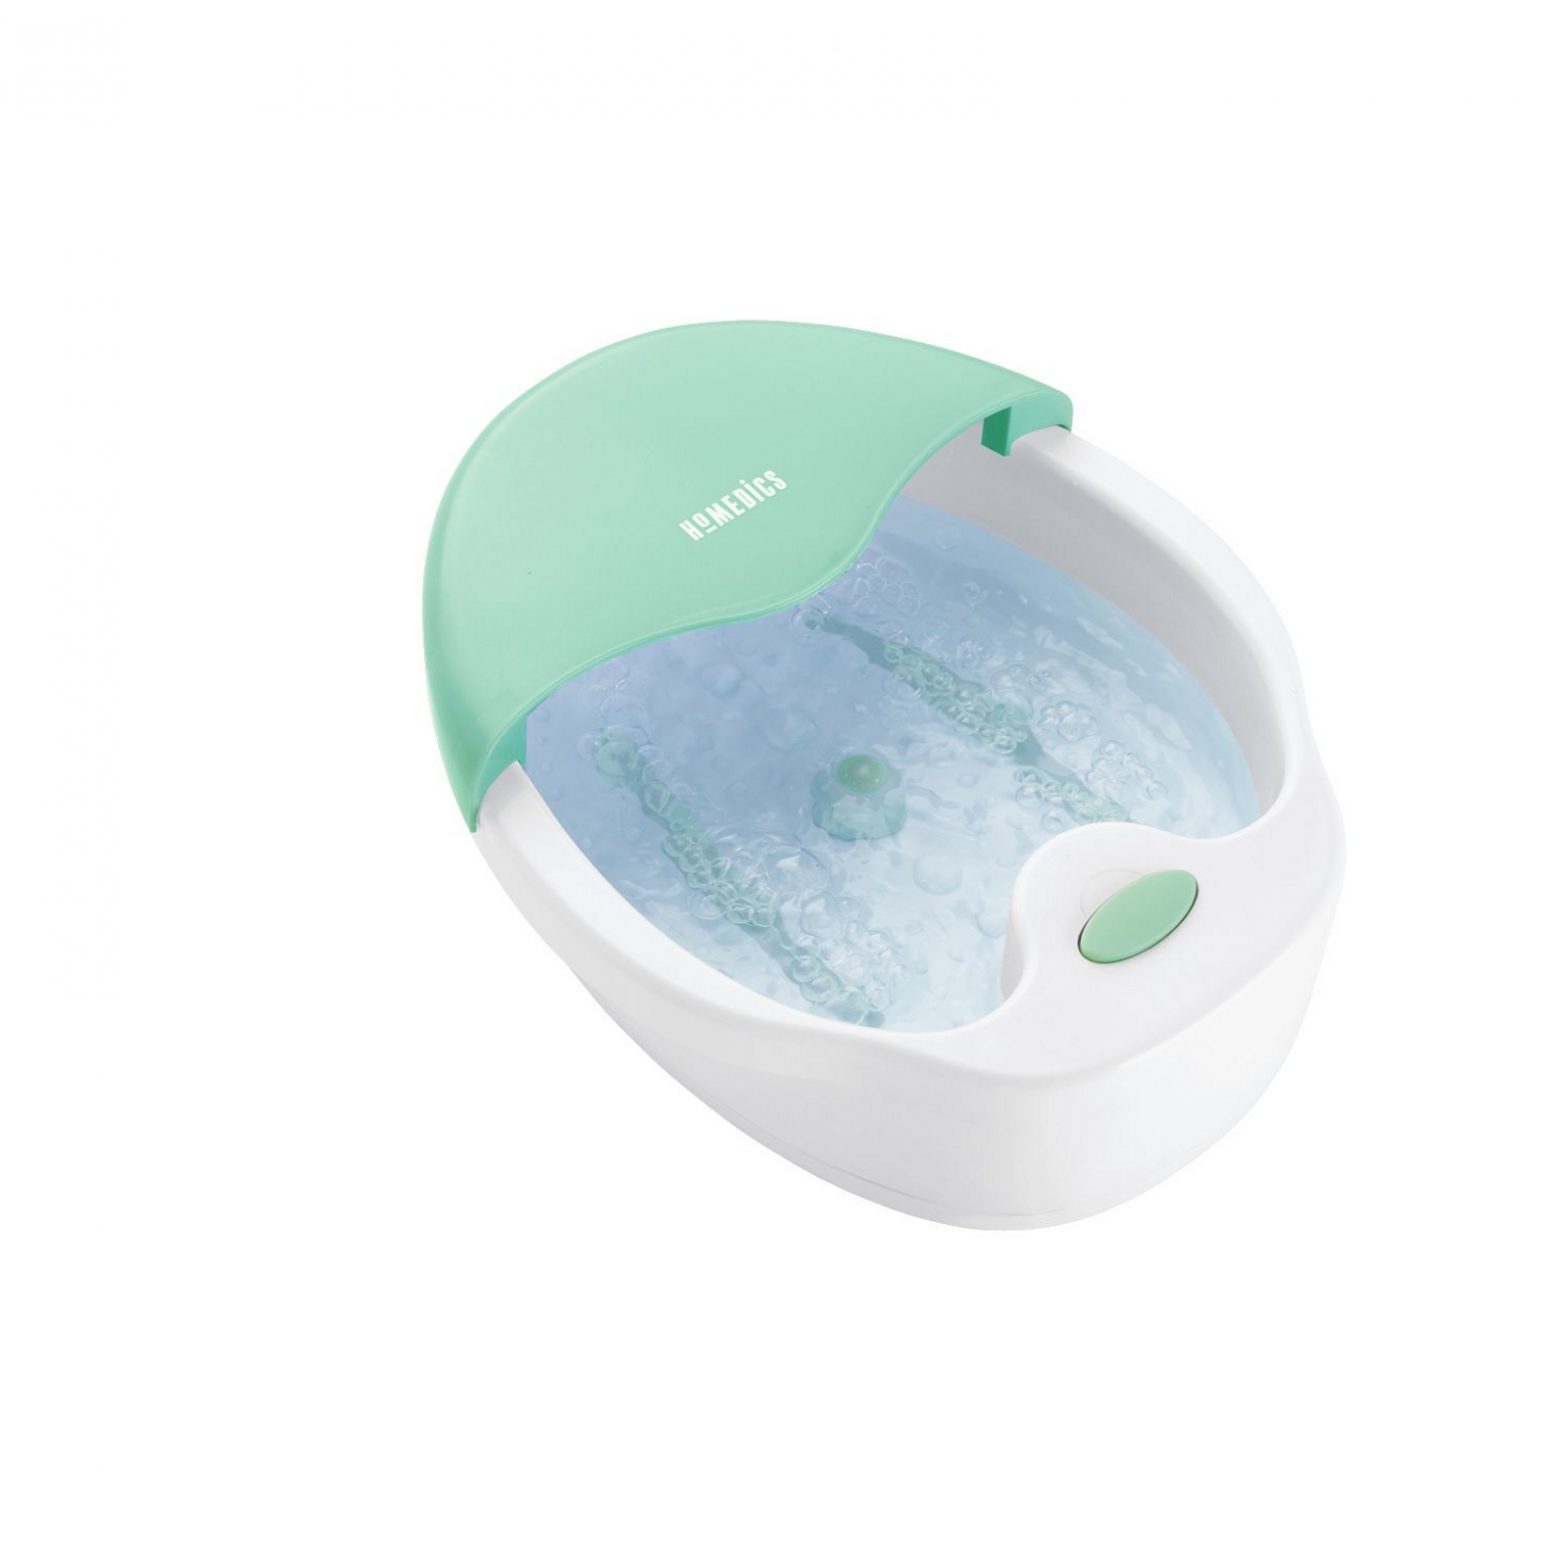 Homedics FB-30 Bubble Bliss Foot Spa with Heat Instruction Manual and Warranty Information